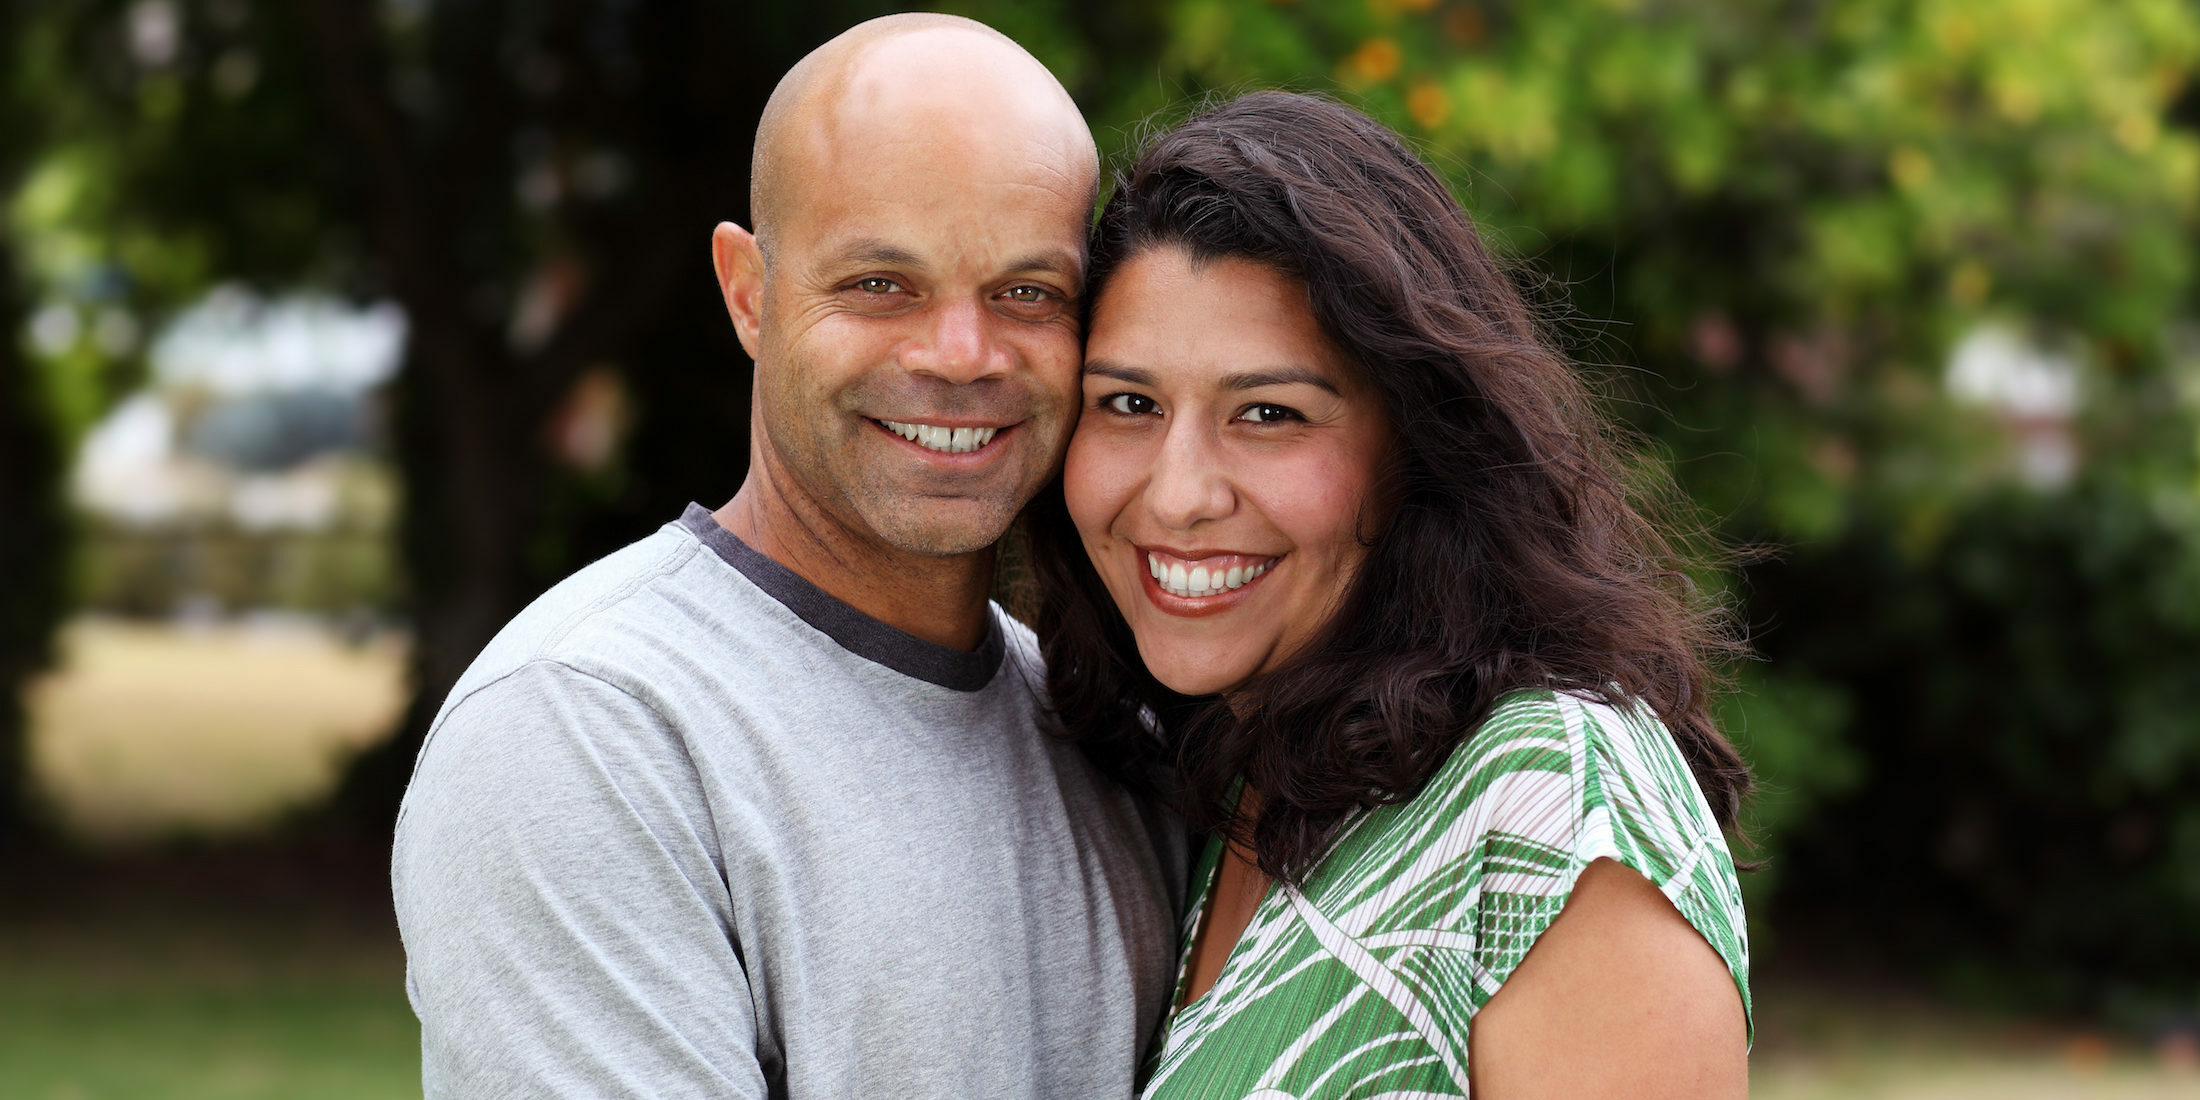 Power to the patients | Vanguard Communications | Couple in park